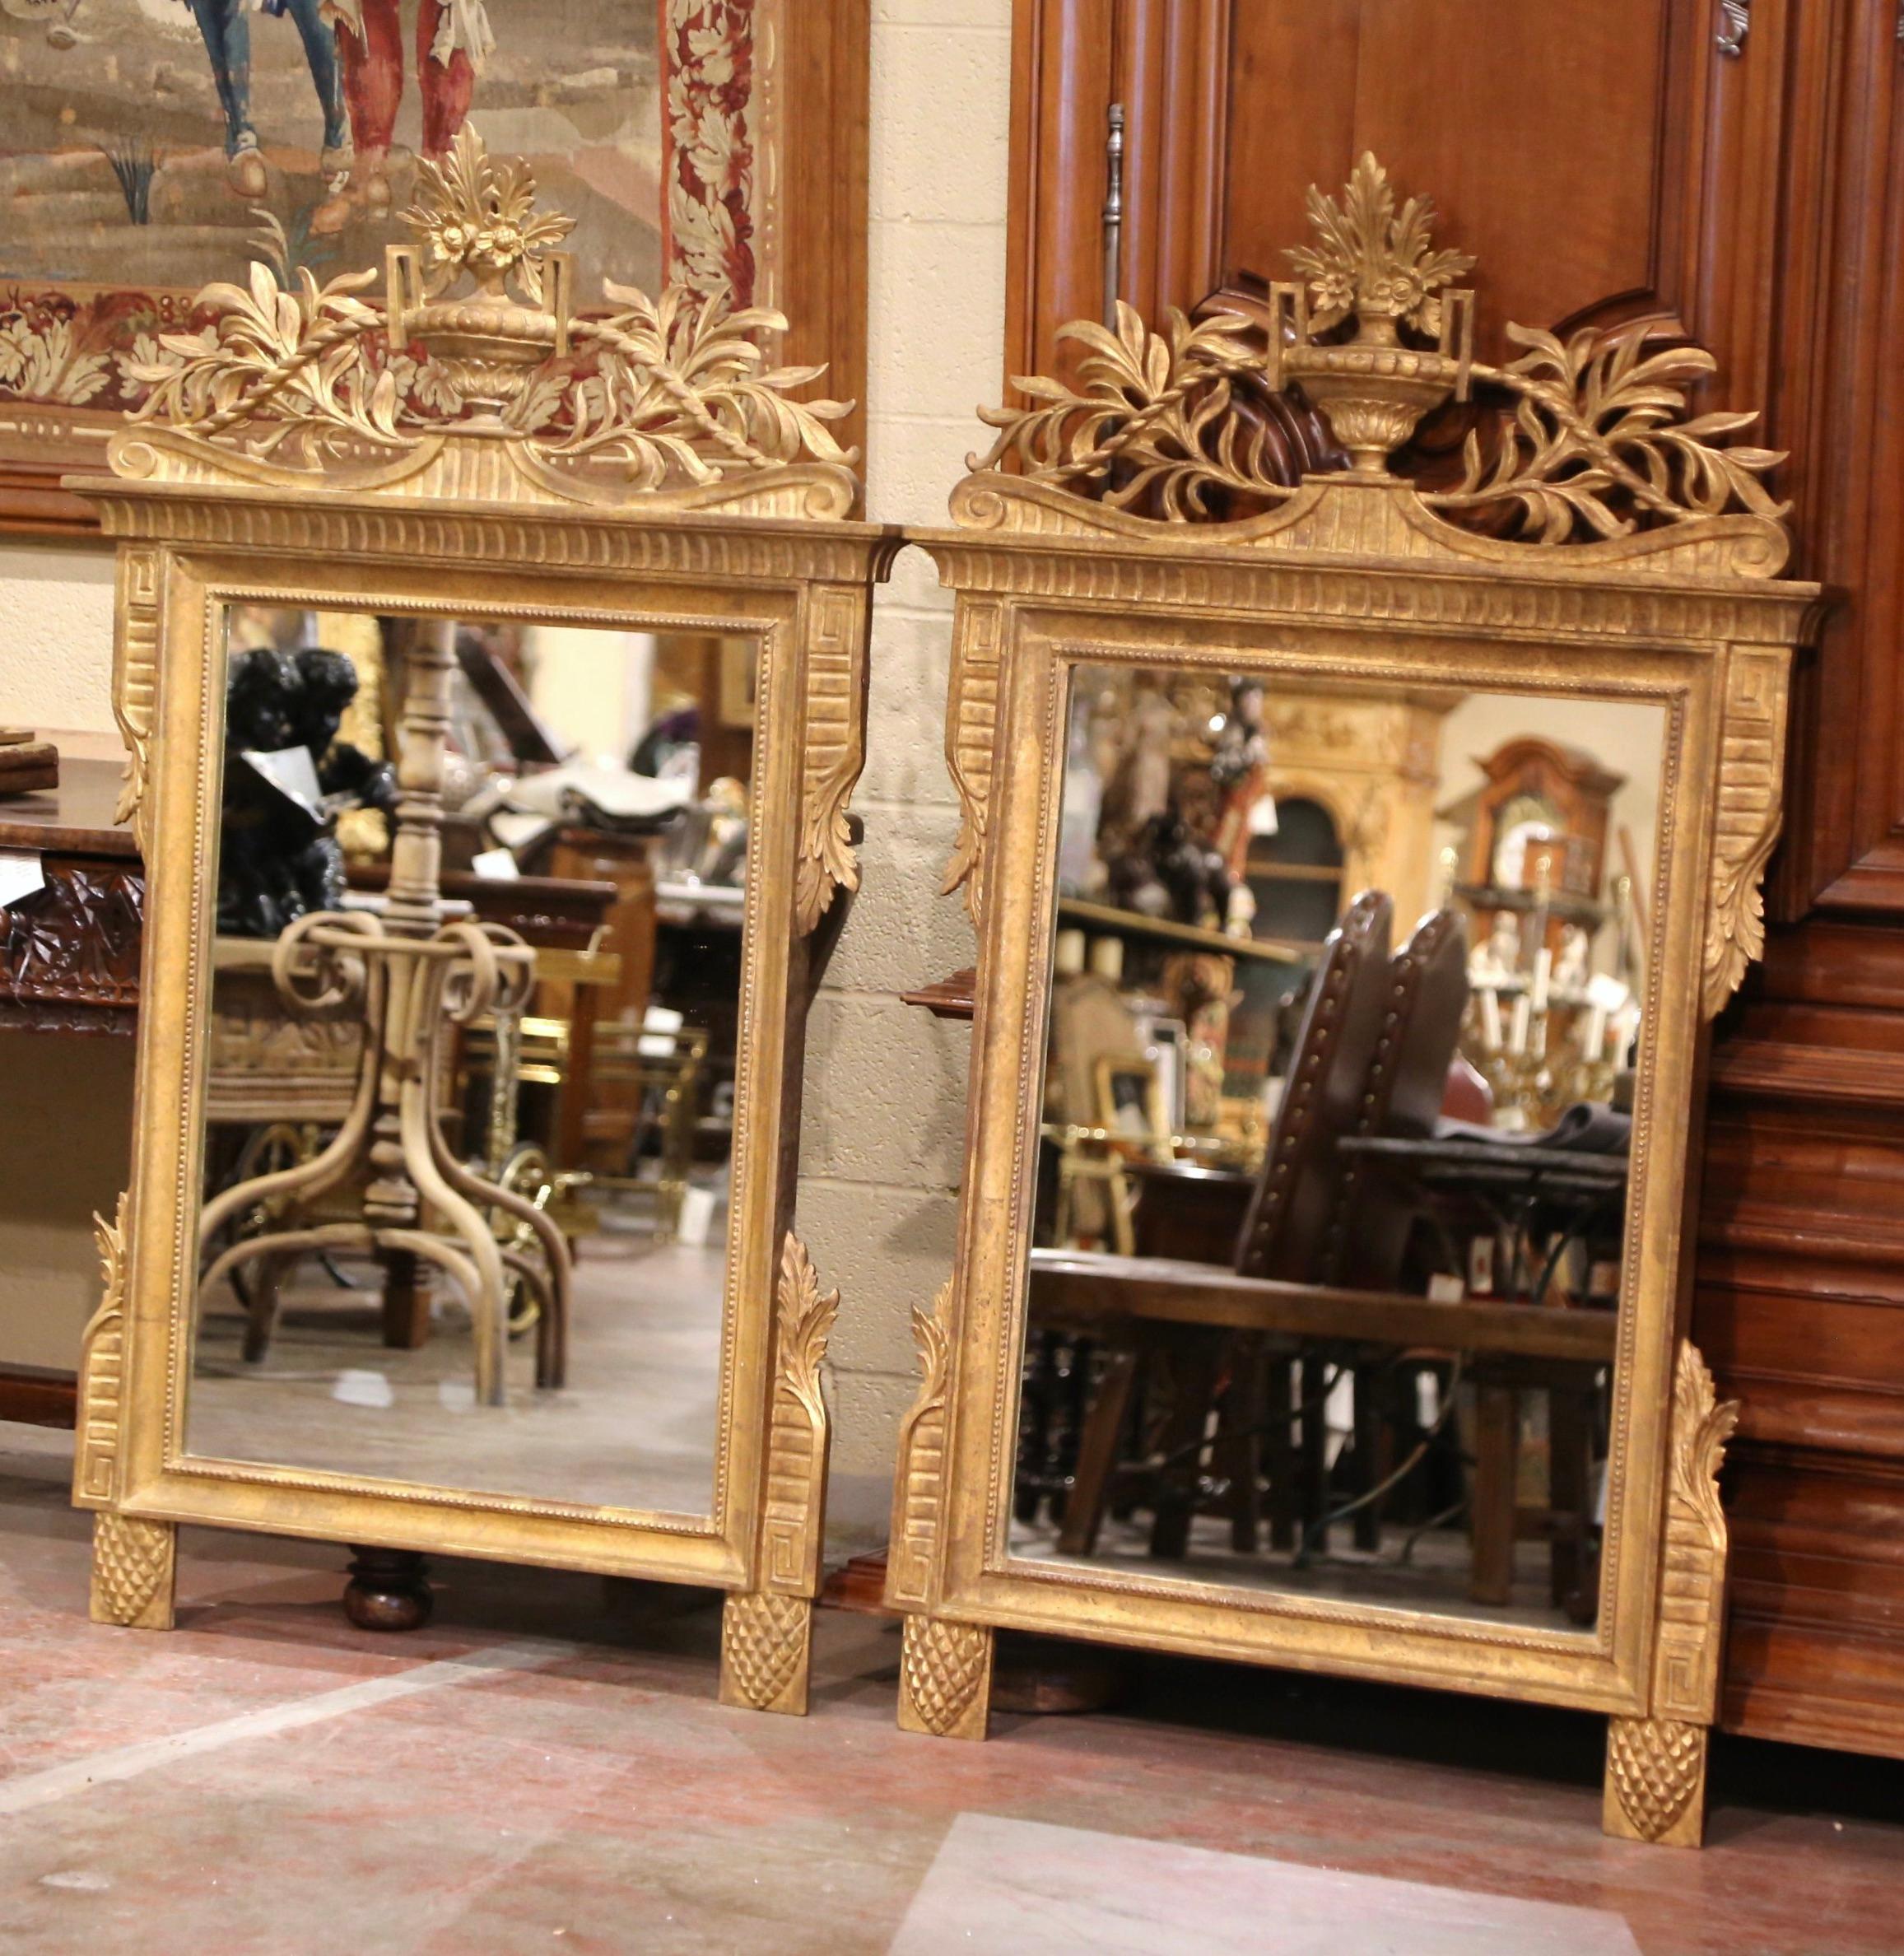 Decorate a living room with this elegant pair of almost 5 foot tall antique wall mirrors. Hand carved in France circa 1930 and rectangular in shape, each large mirror is decorated with the traditional Louis XVI flower vase at the pediment and